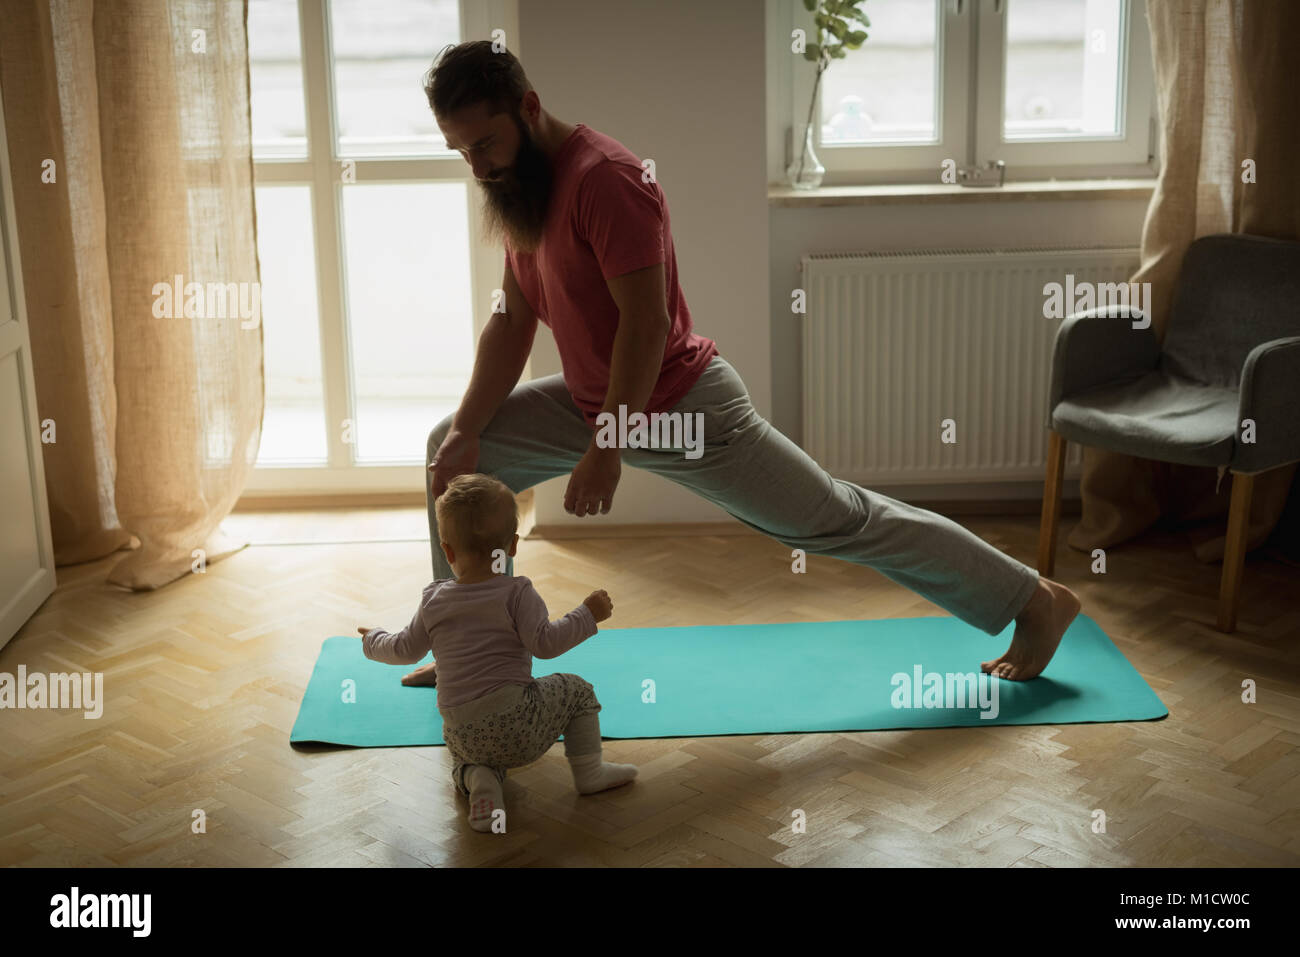 Baby imitating his father while exercising Stock Photo